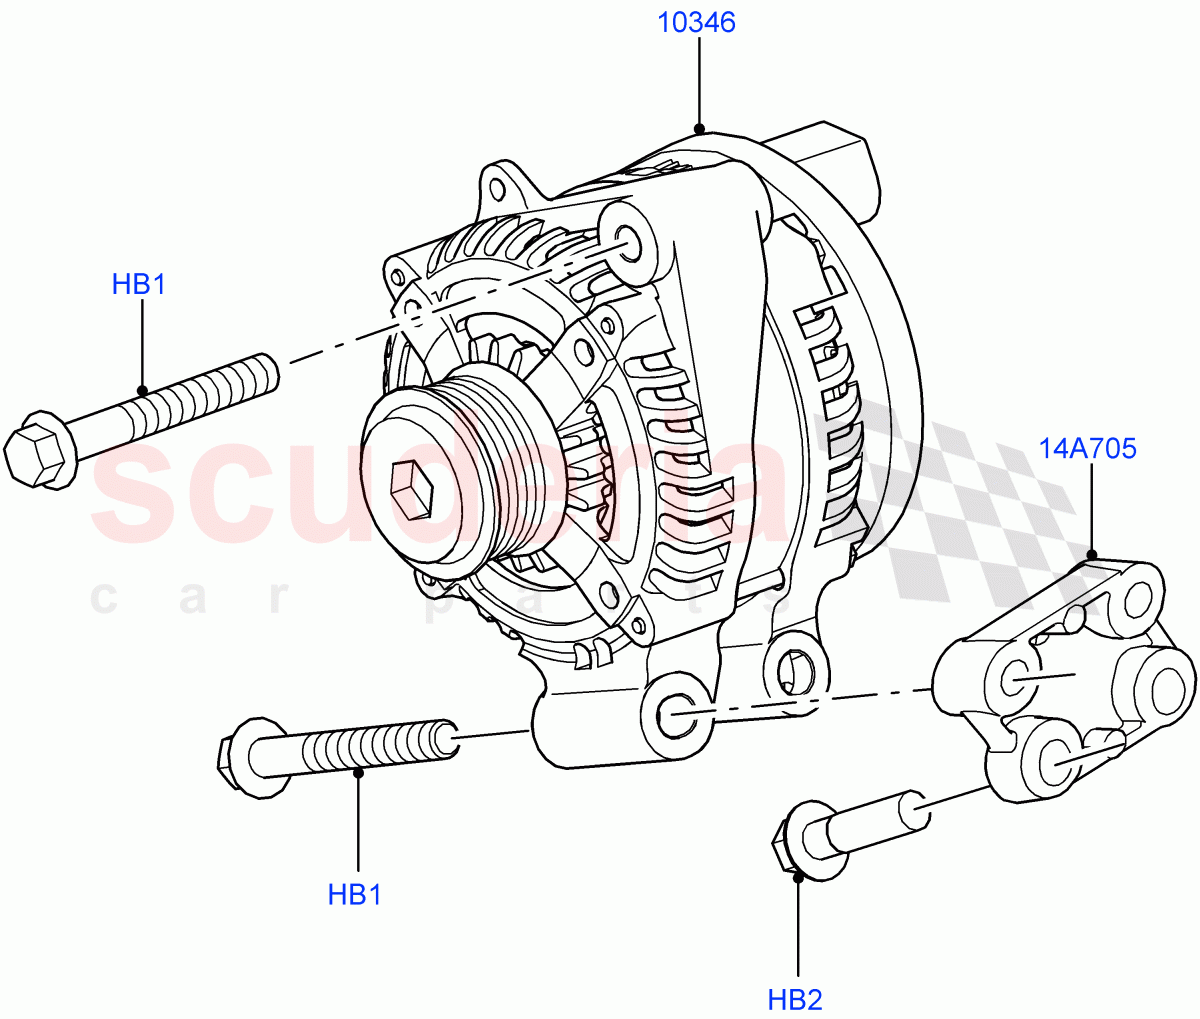 Alternator And Mountings(Nitra Plant Build)(3.0L DOHC GDI SC V6 PETROL)((V)FROMK2000001) of Land Rover Land Rover Discovery 5 (2017+) [3.0 DOHC GDI SC V6 Petrol]